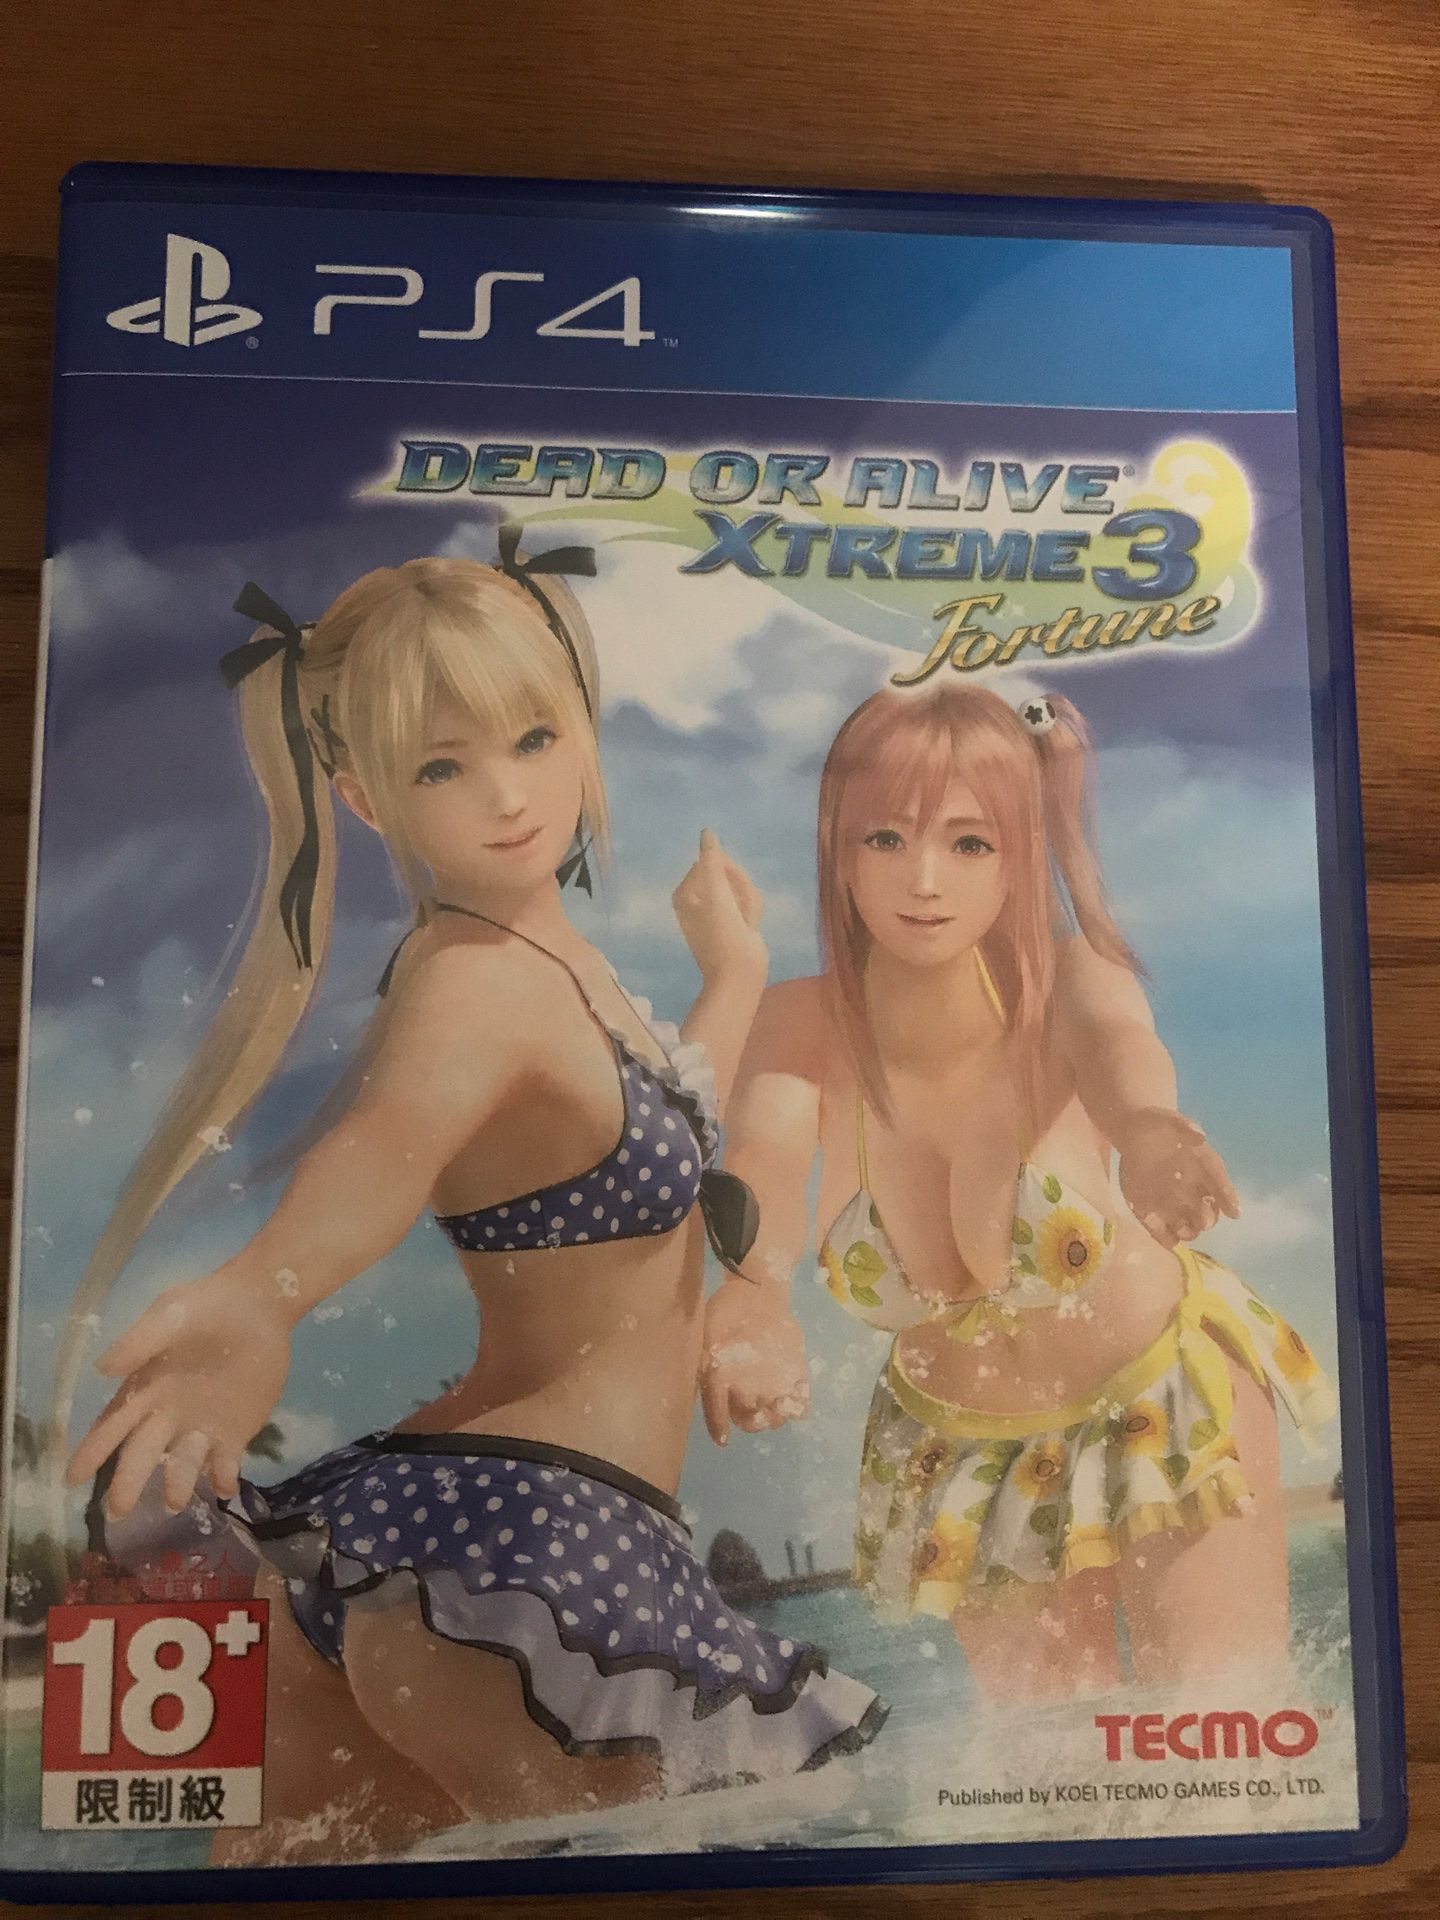 Dead or alive xtreme 3 fortune